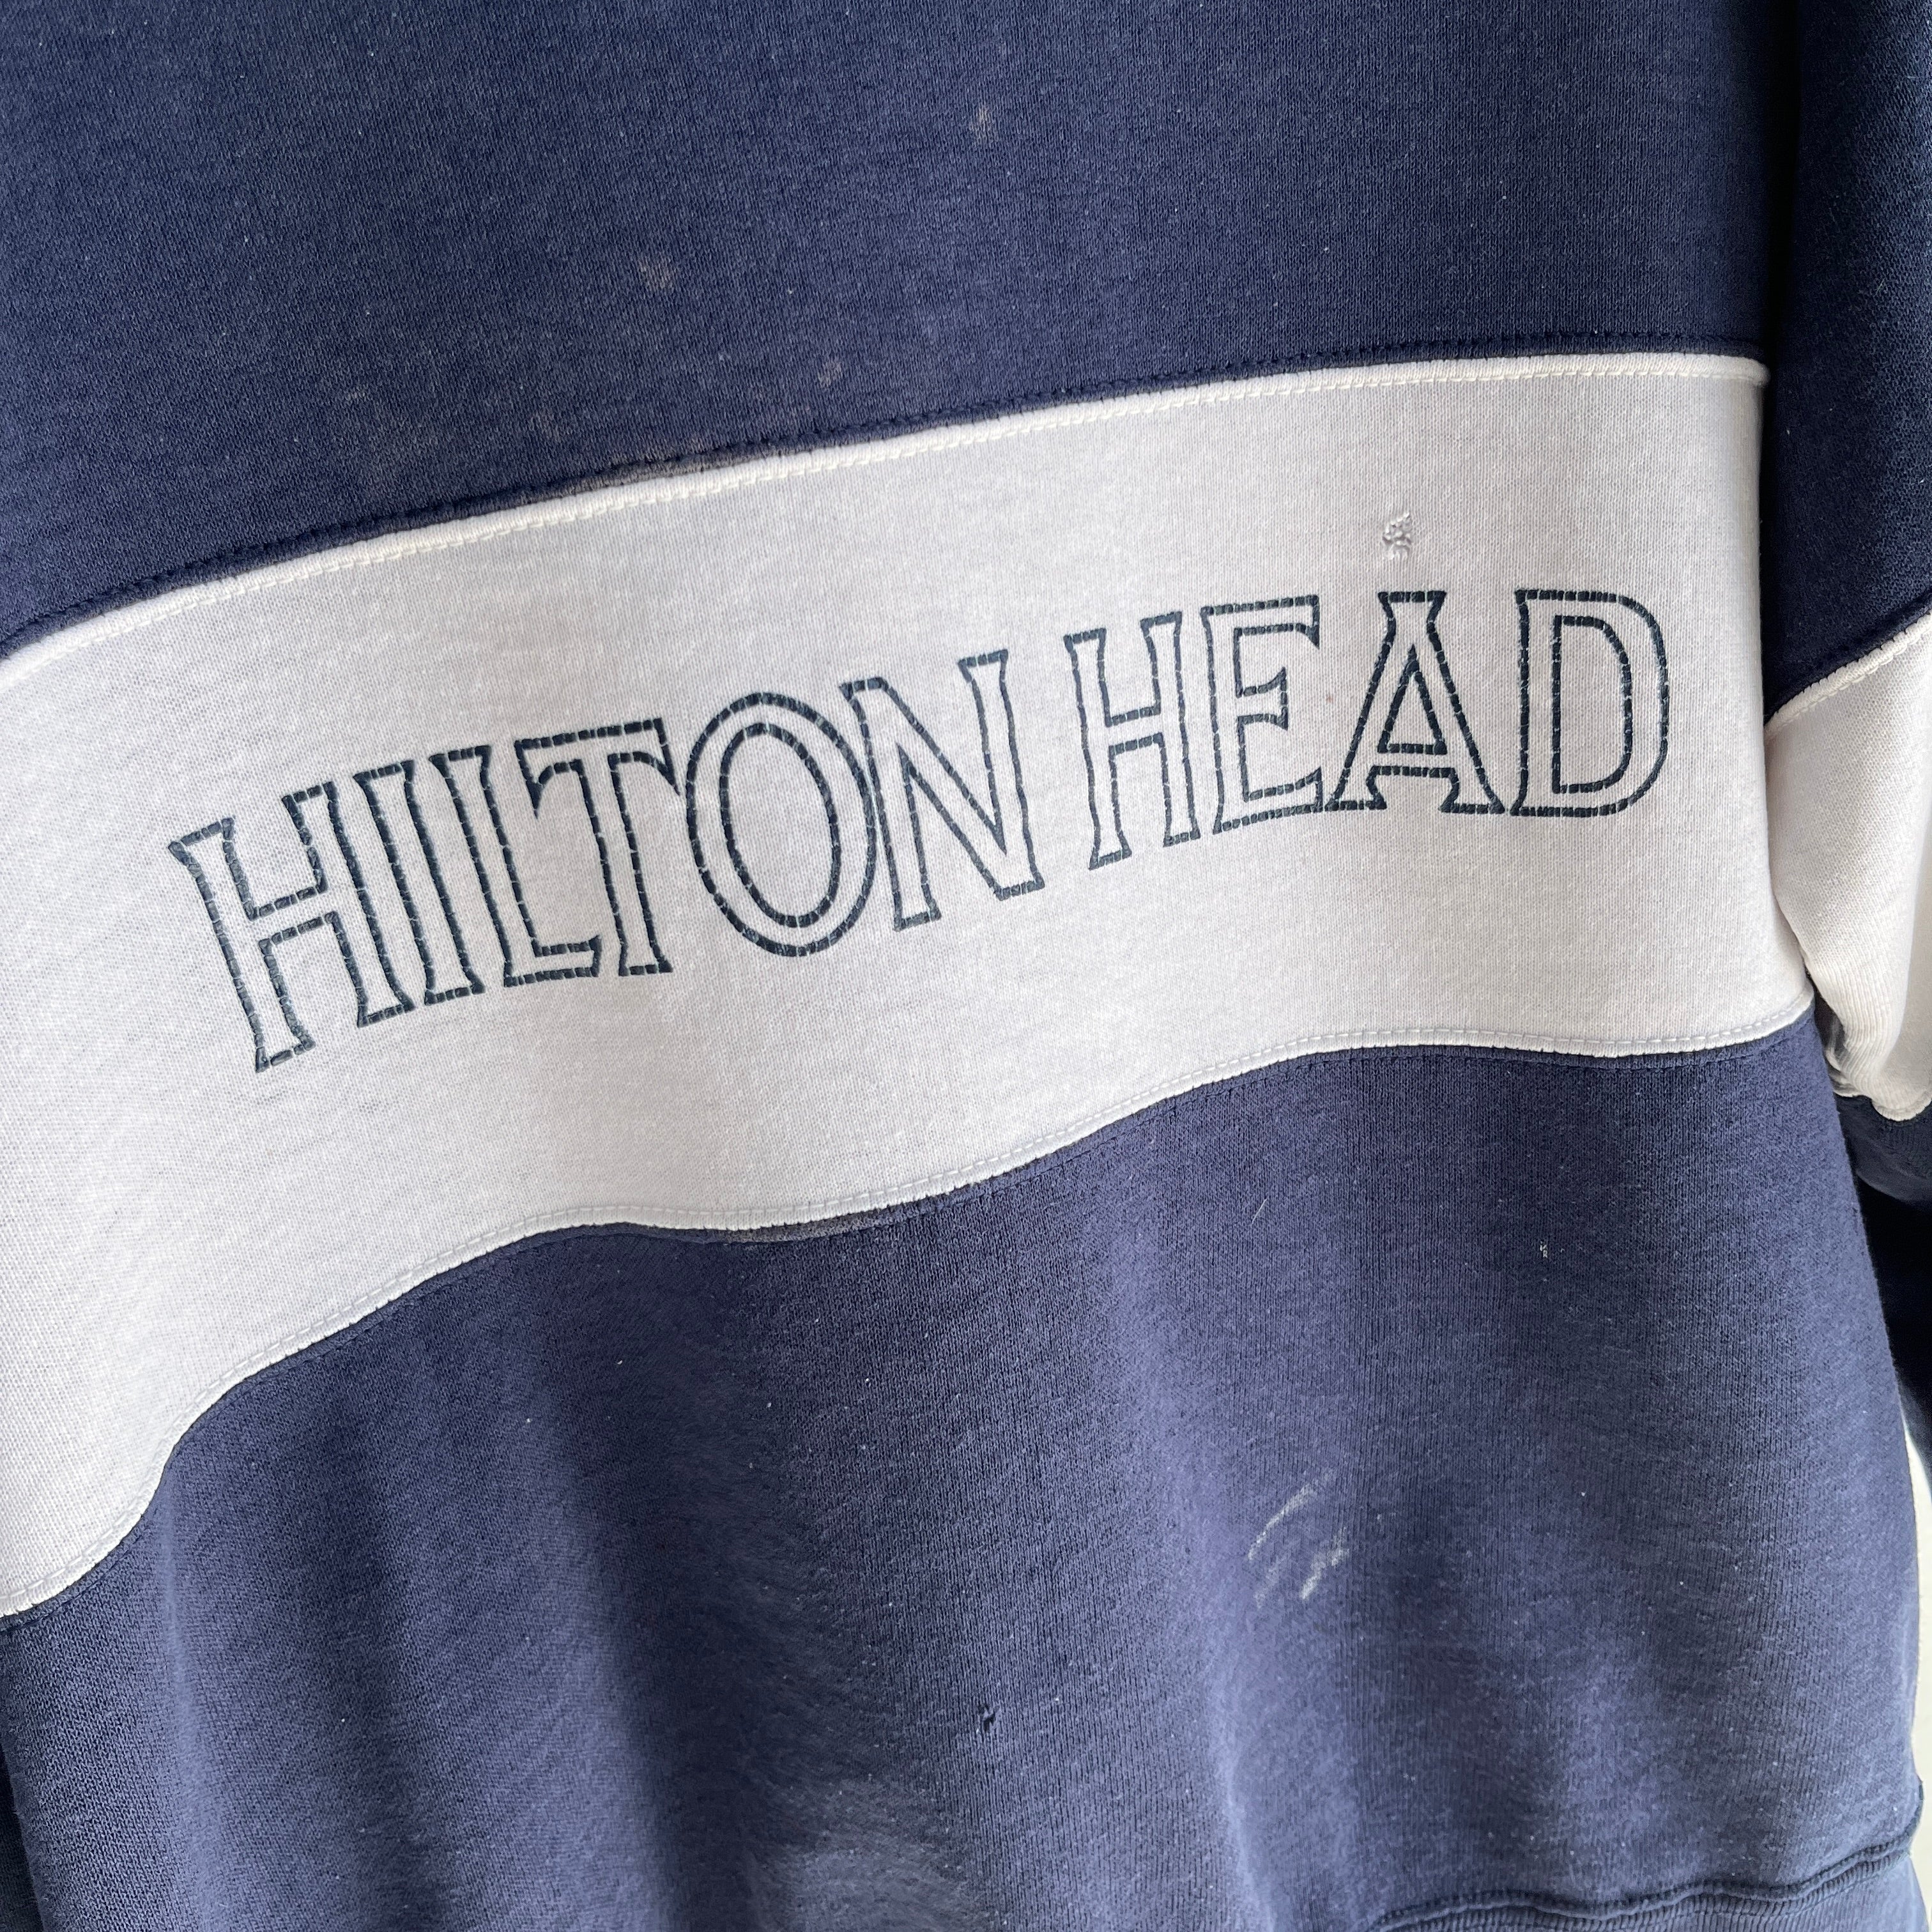 1980s Thinned Out and Worn Hilton Head Color Block Sweatshirt